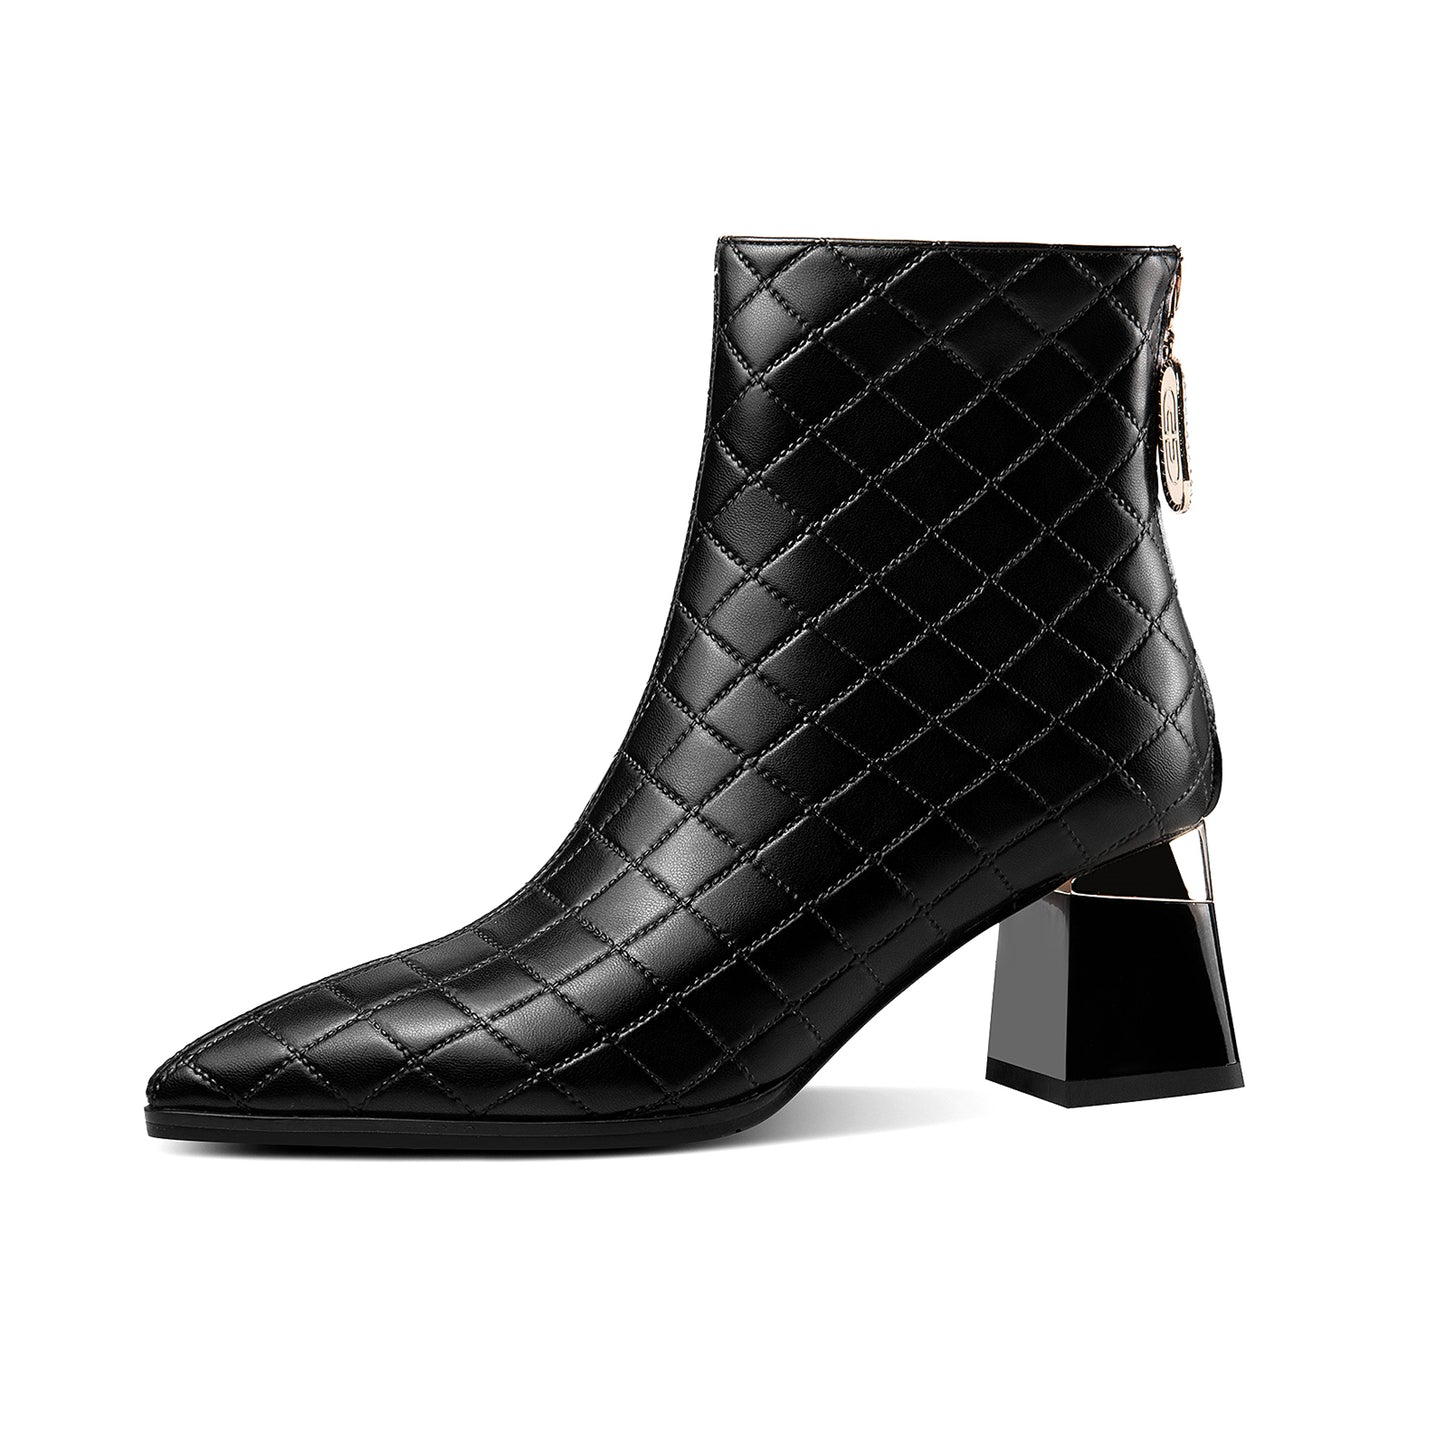 TinaCus Genuine Leather Women's Handmade Pointed Toe Checkered Chunky Heel Back Zip Up Ankle Boots